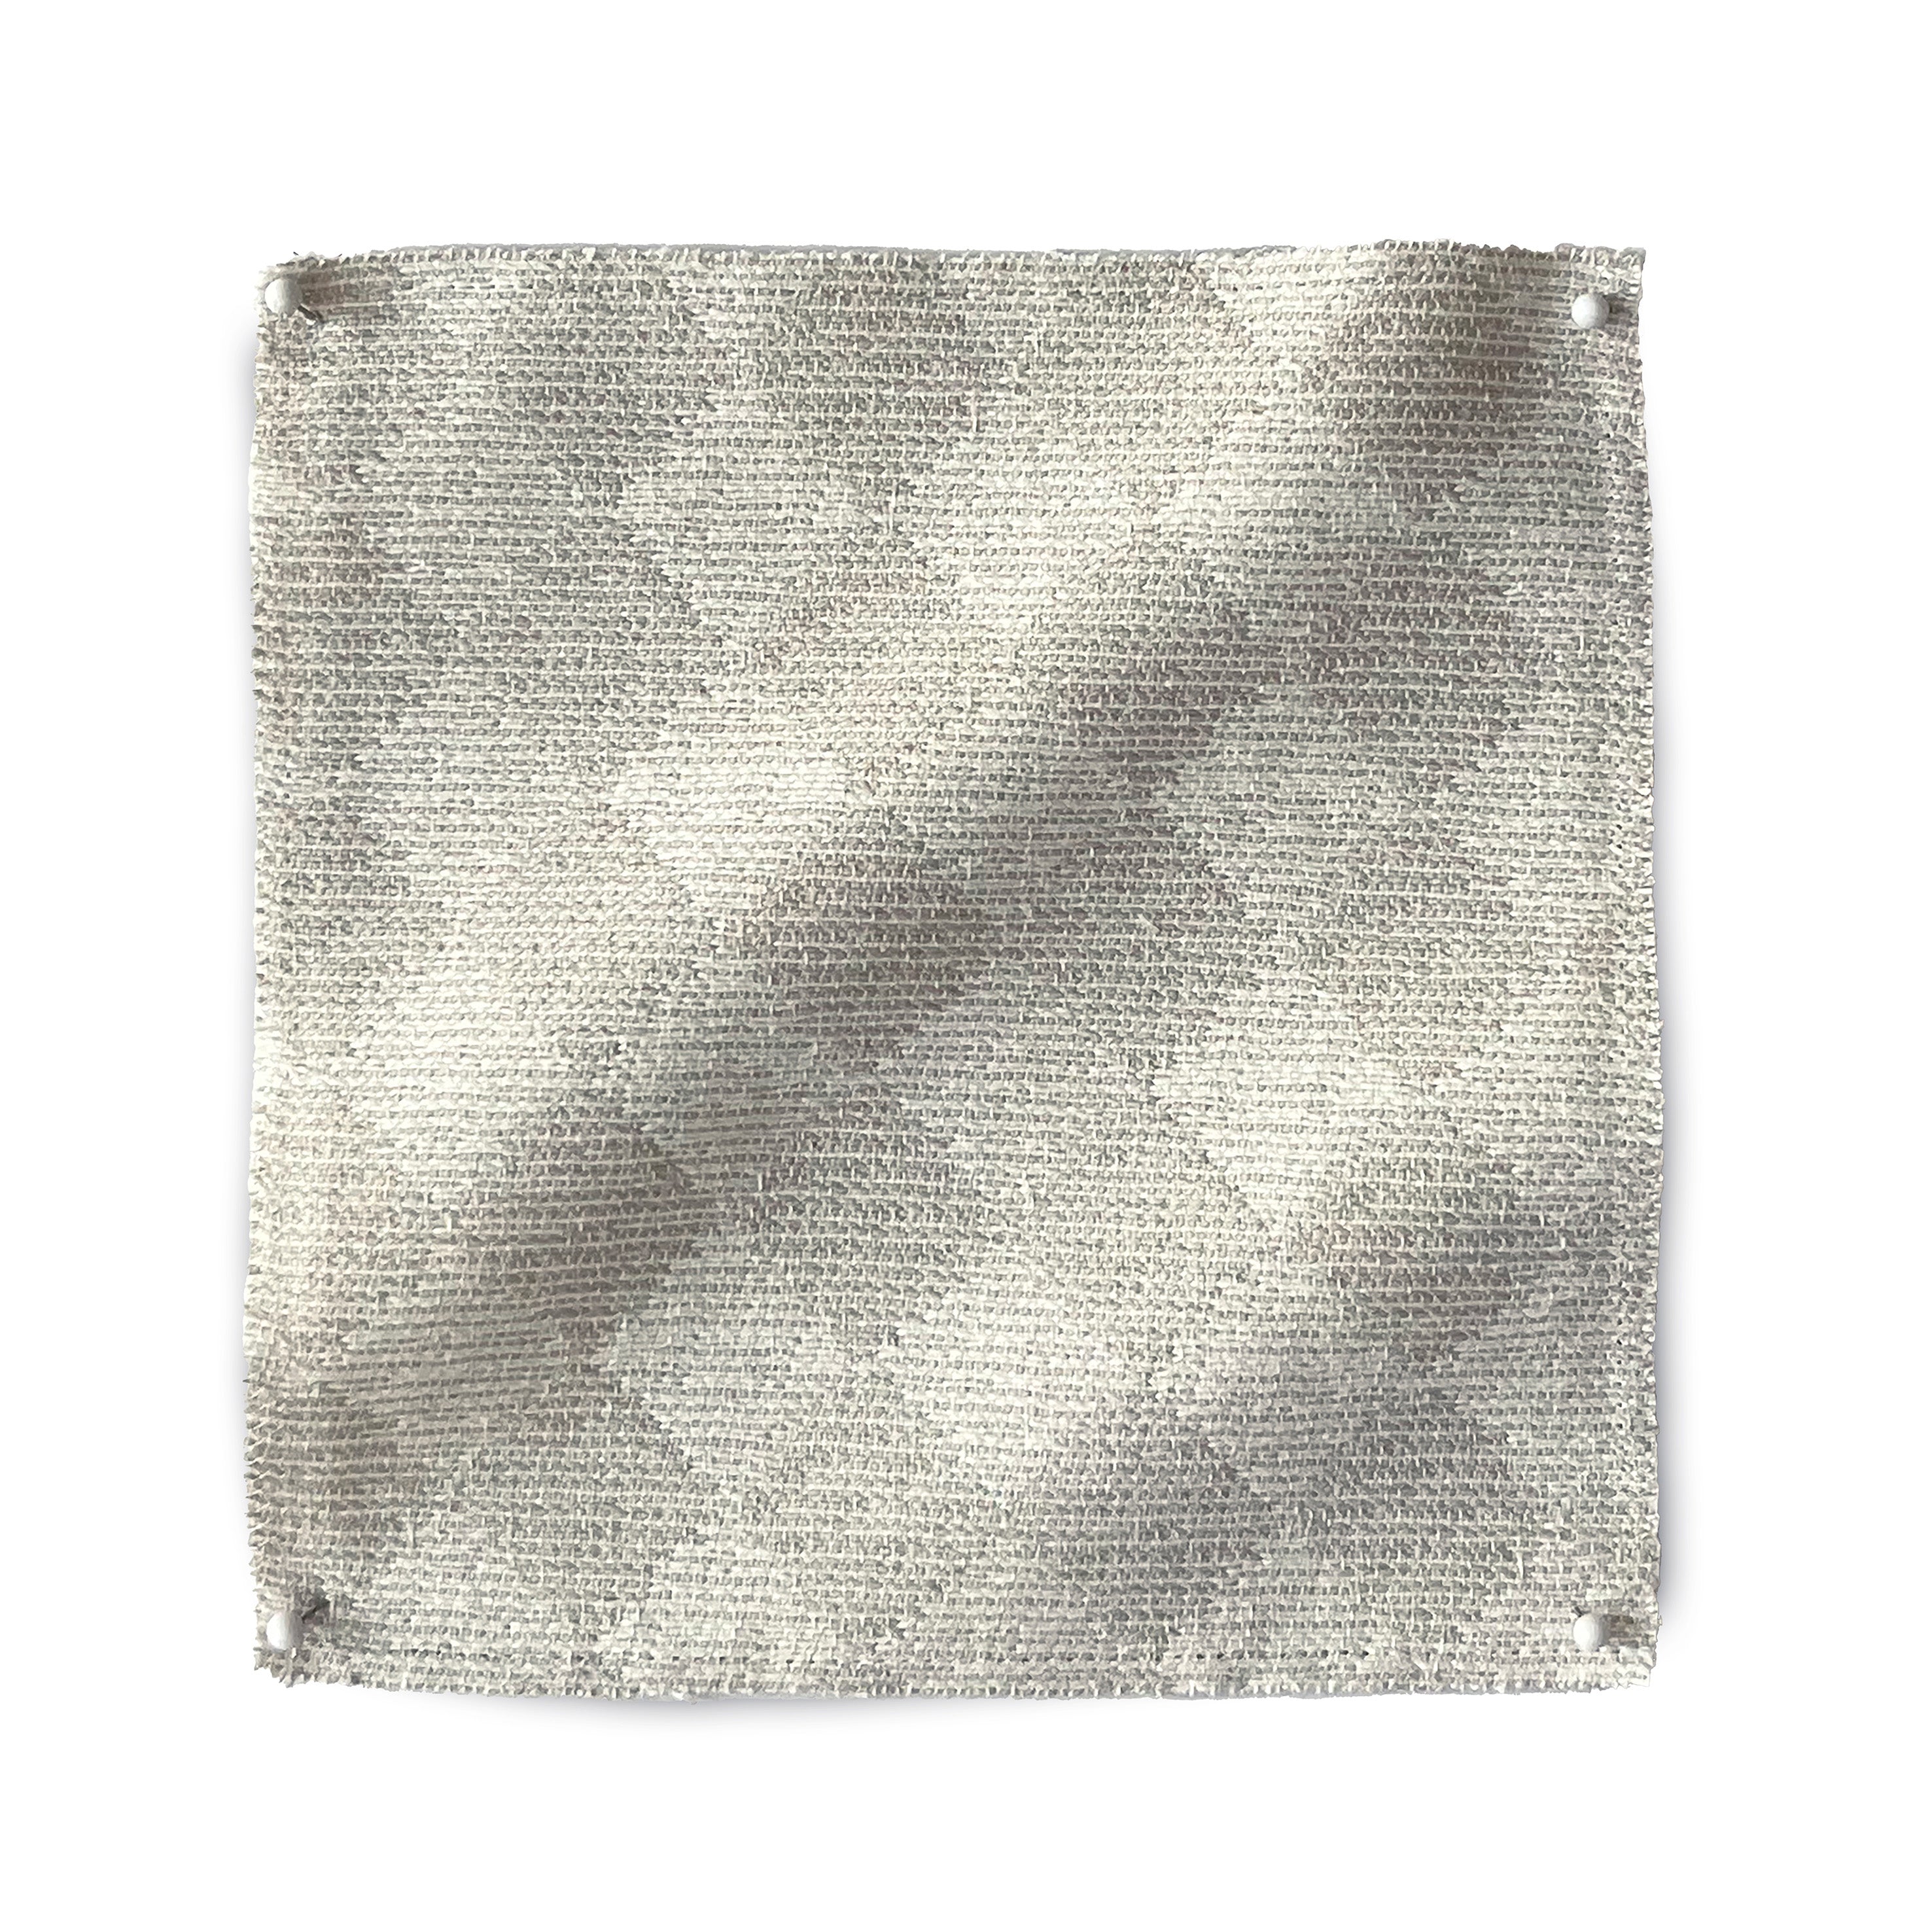 Square fabric swatch in a textural diamond print in cream.